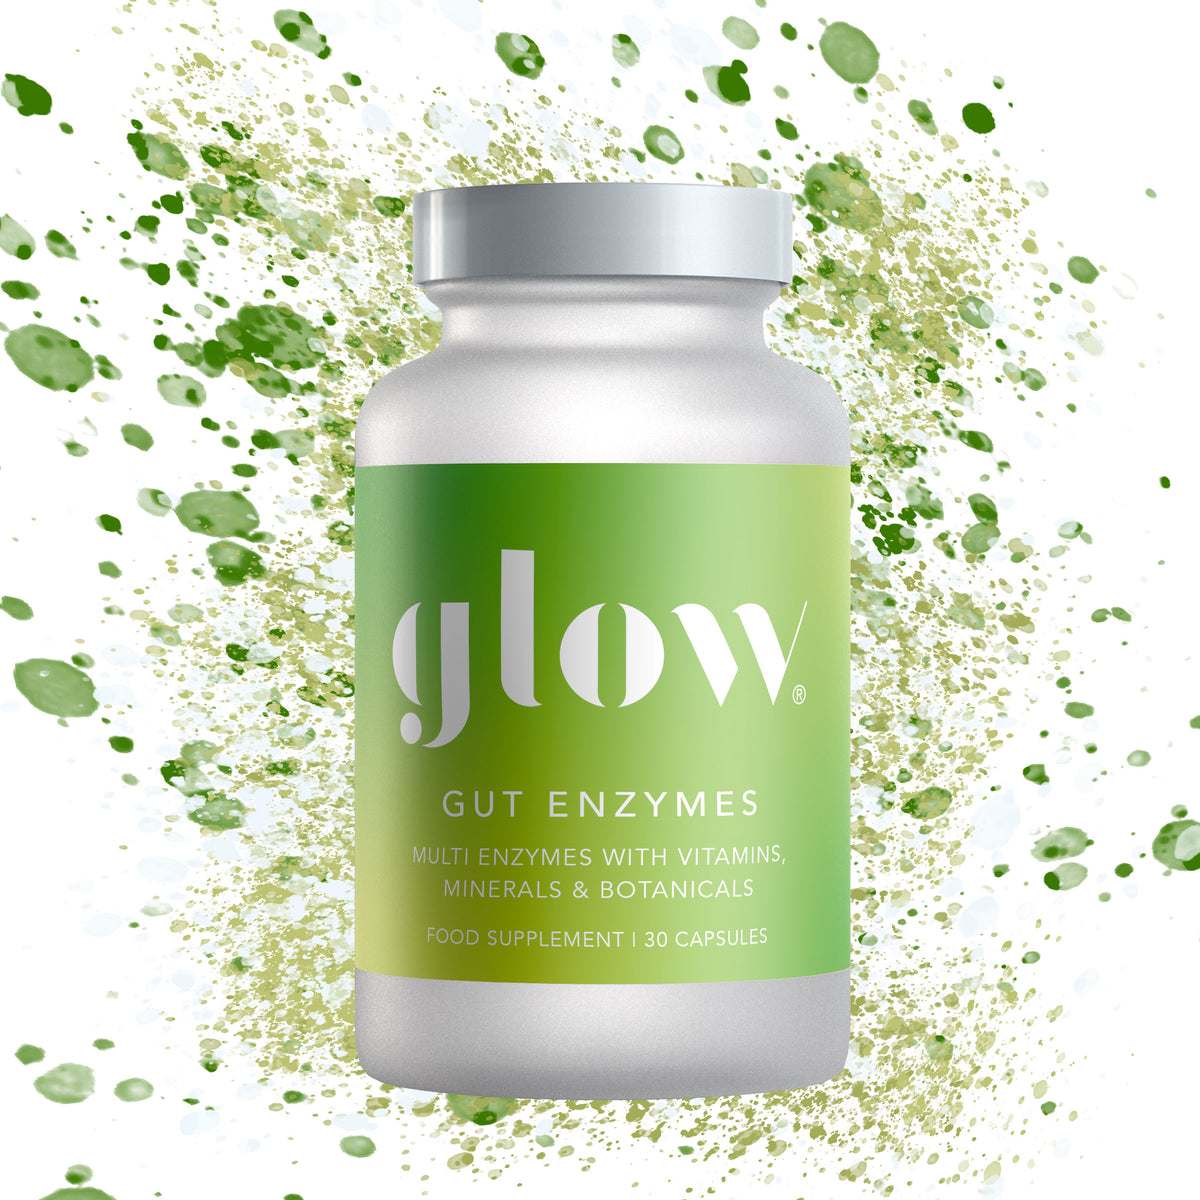 Gut Enzymes